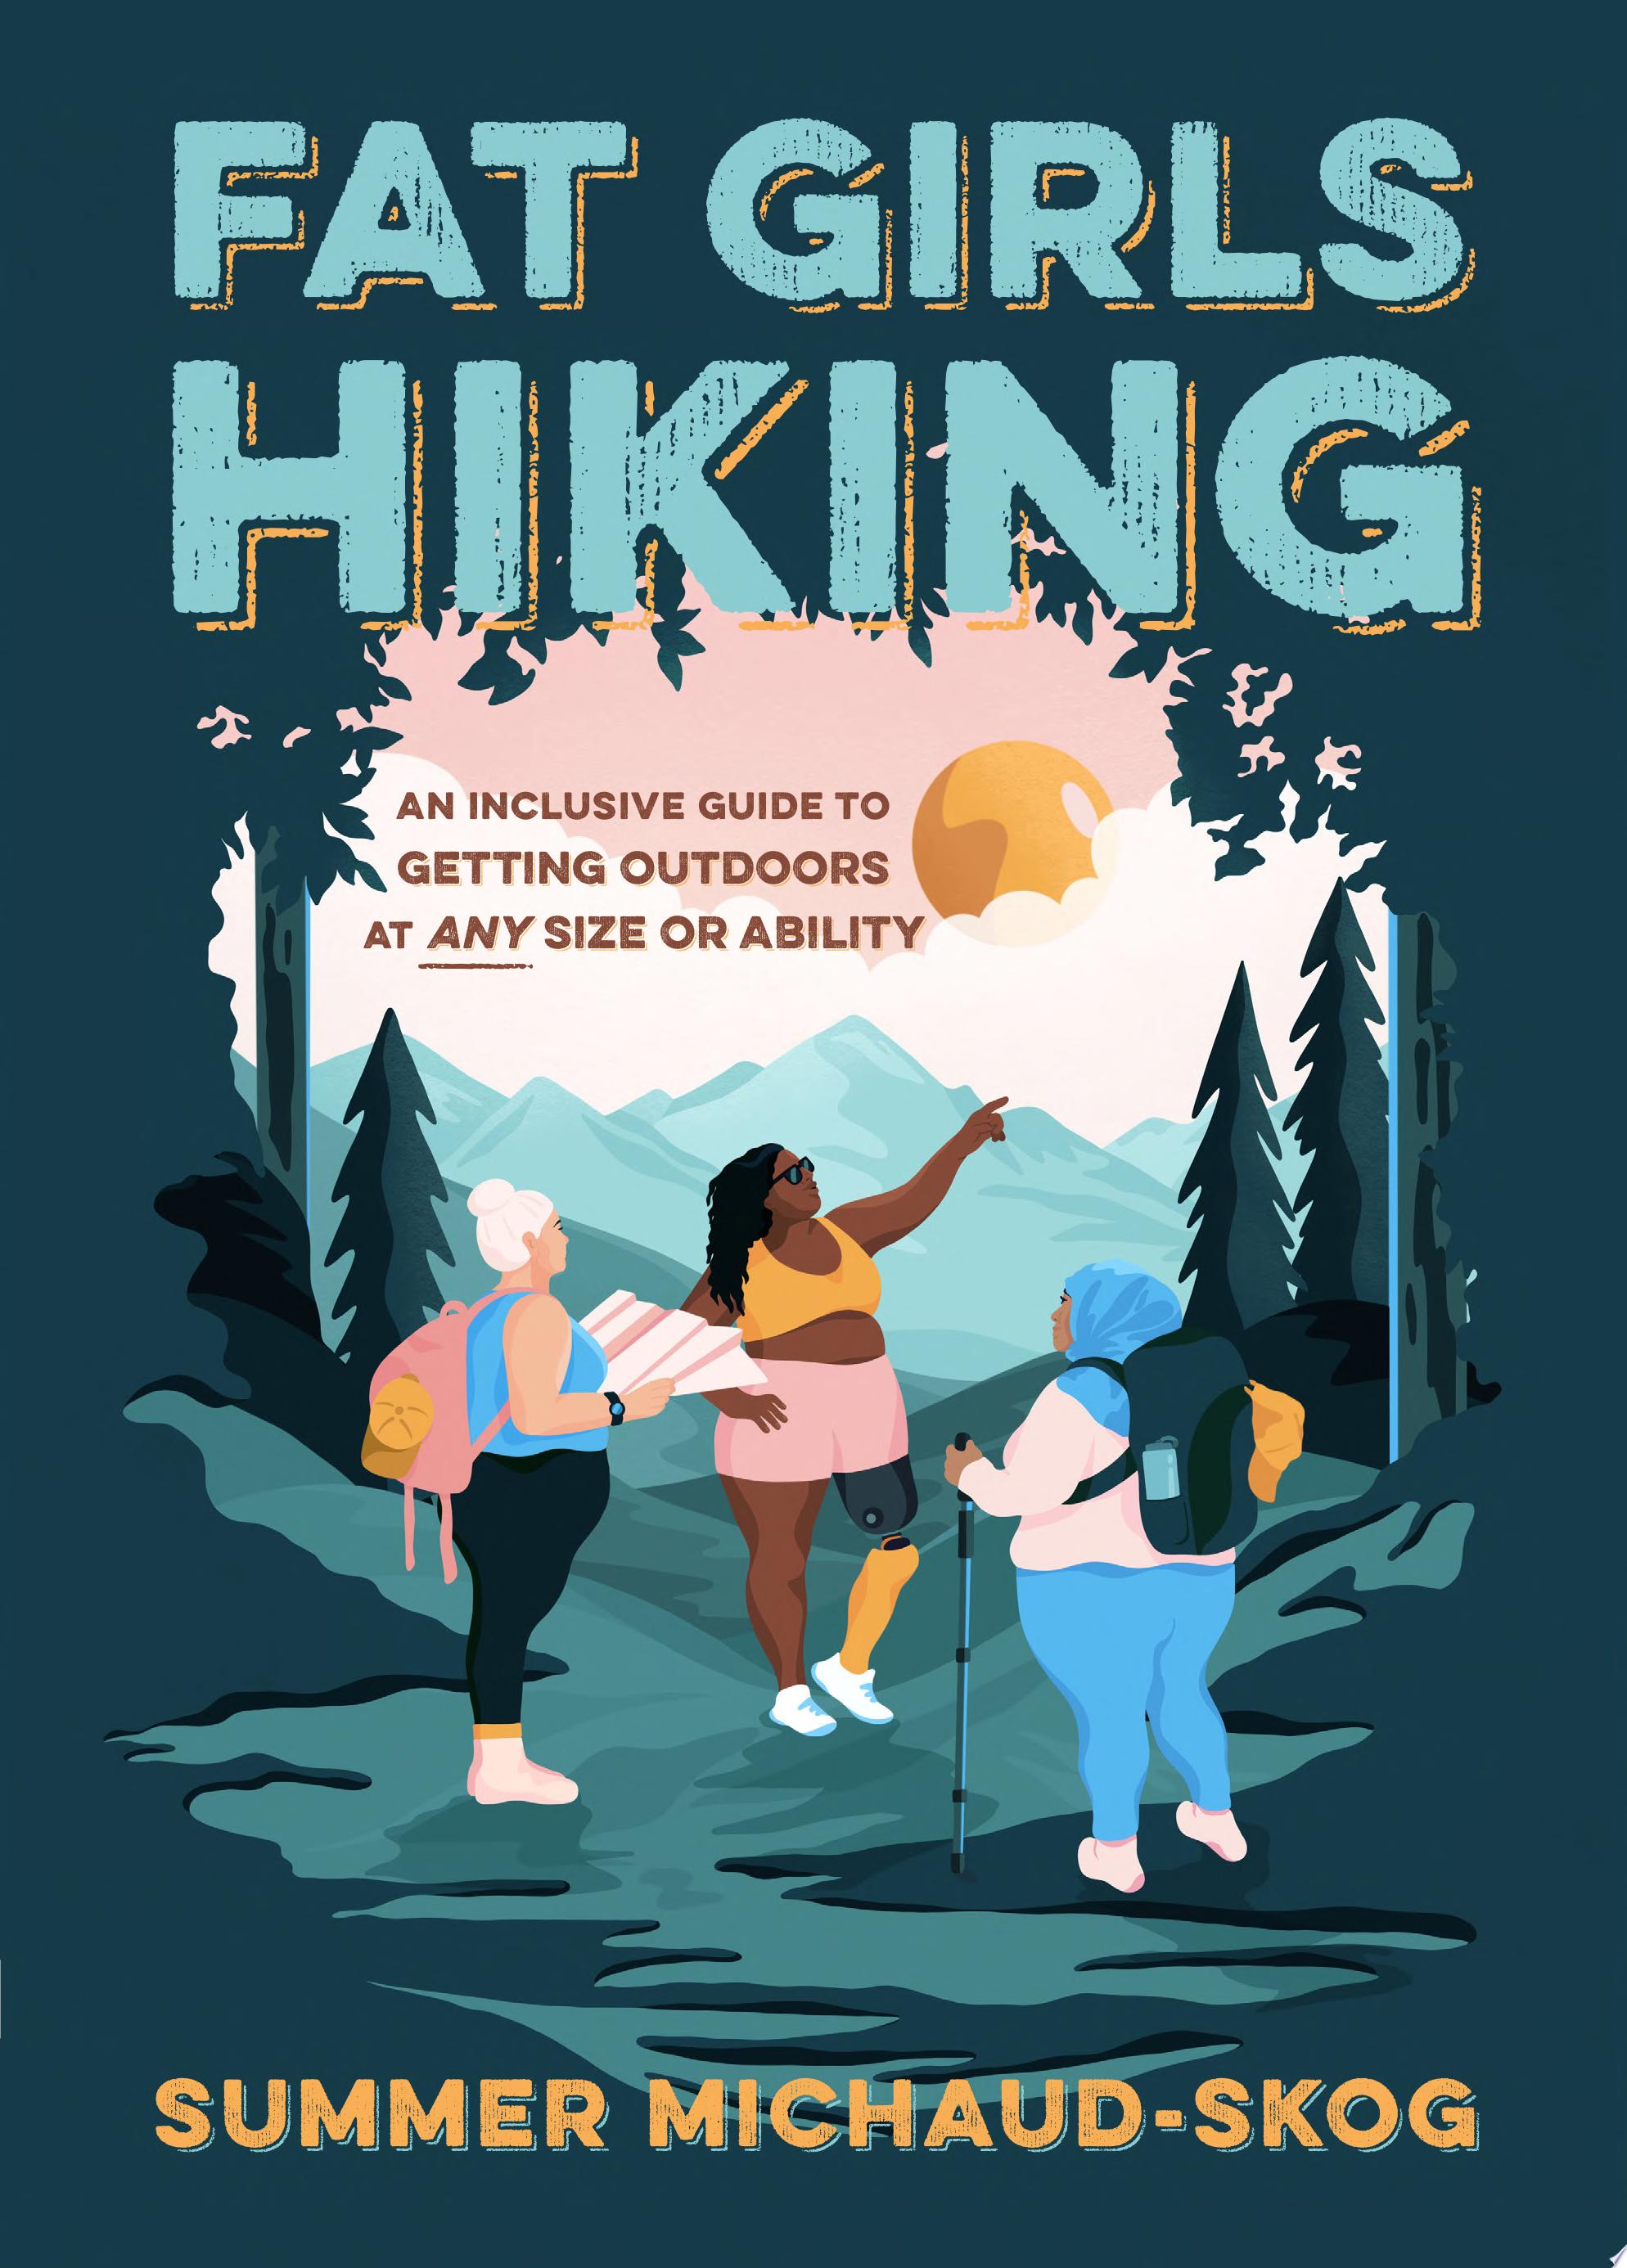 Image for "Fat Girls Hiking"